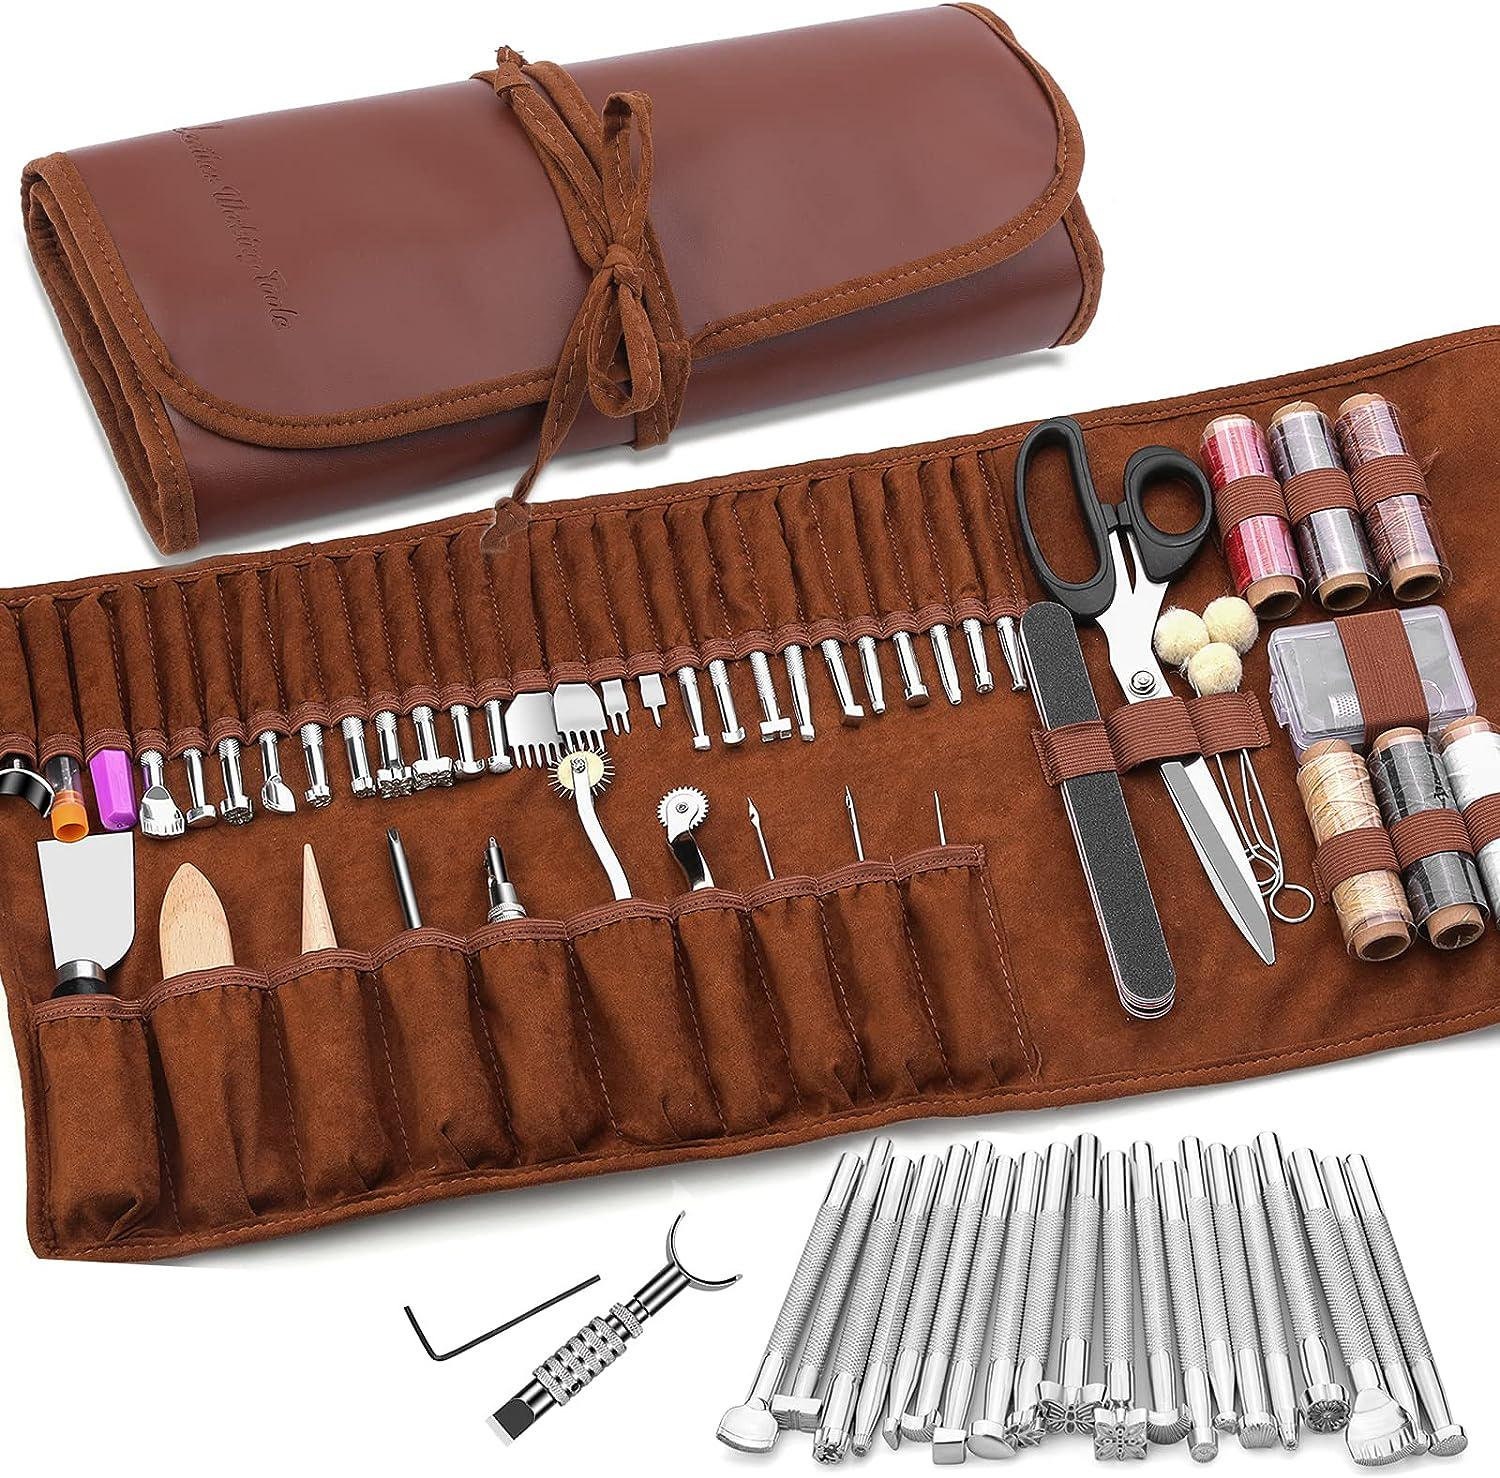 Leather Sewing Kit Leather Craft Tools Leather Craft Making Leather Sewing  Tools Kit for DIY Sewing Craft Projects with Custom Storage Bag Adjustable  Groover Stitch Wheel Waxed Threads